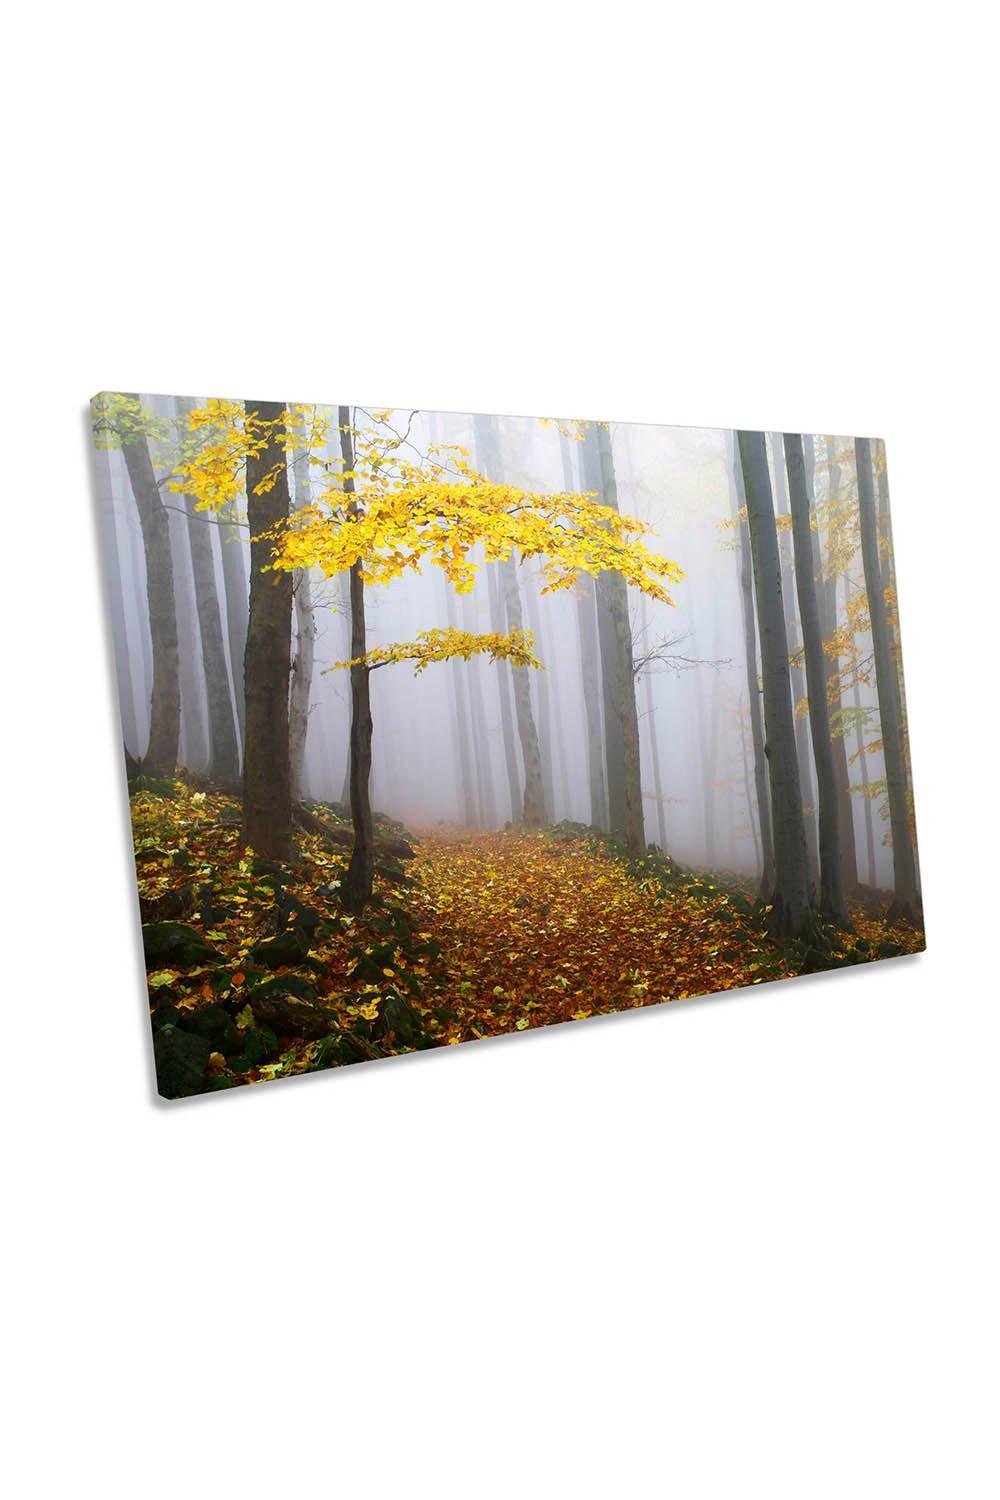 Autumn Forest Misty Woodland Canvas Wall Art Picture Print